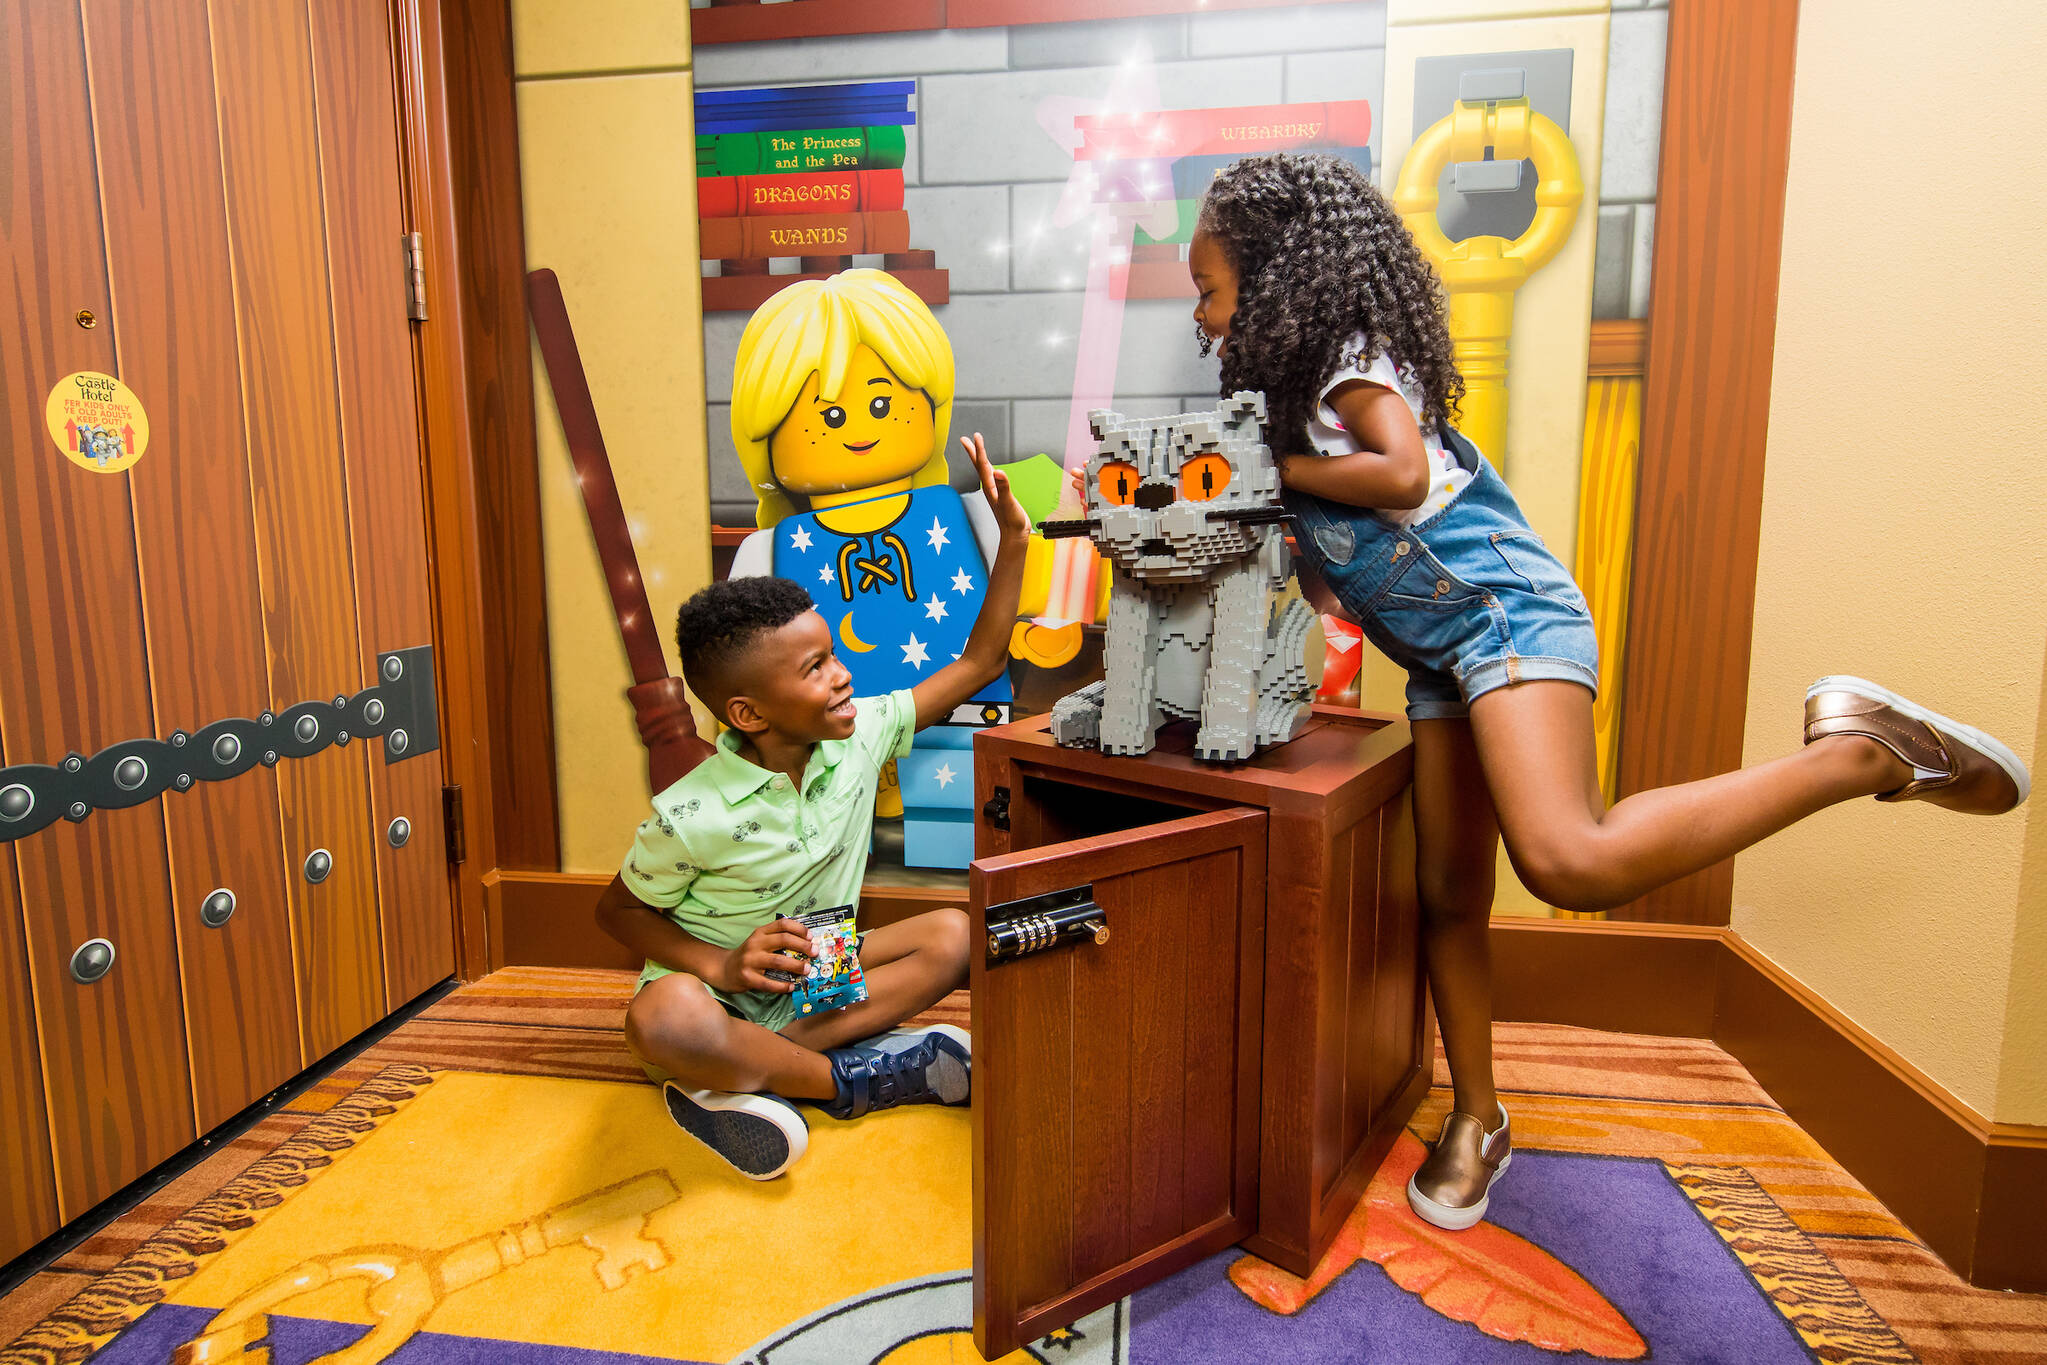 Interactive treasure hunt with LEGO gift in every room